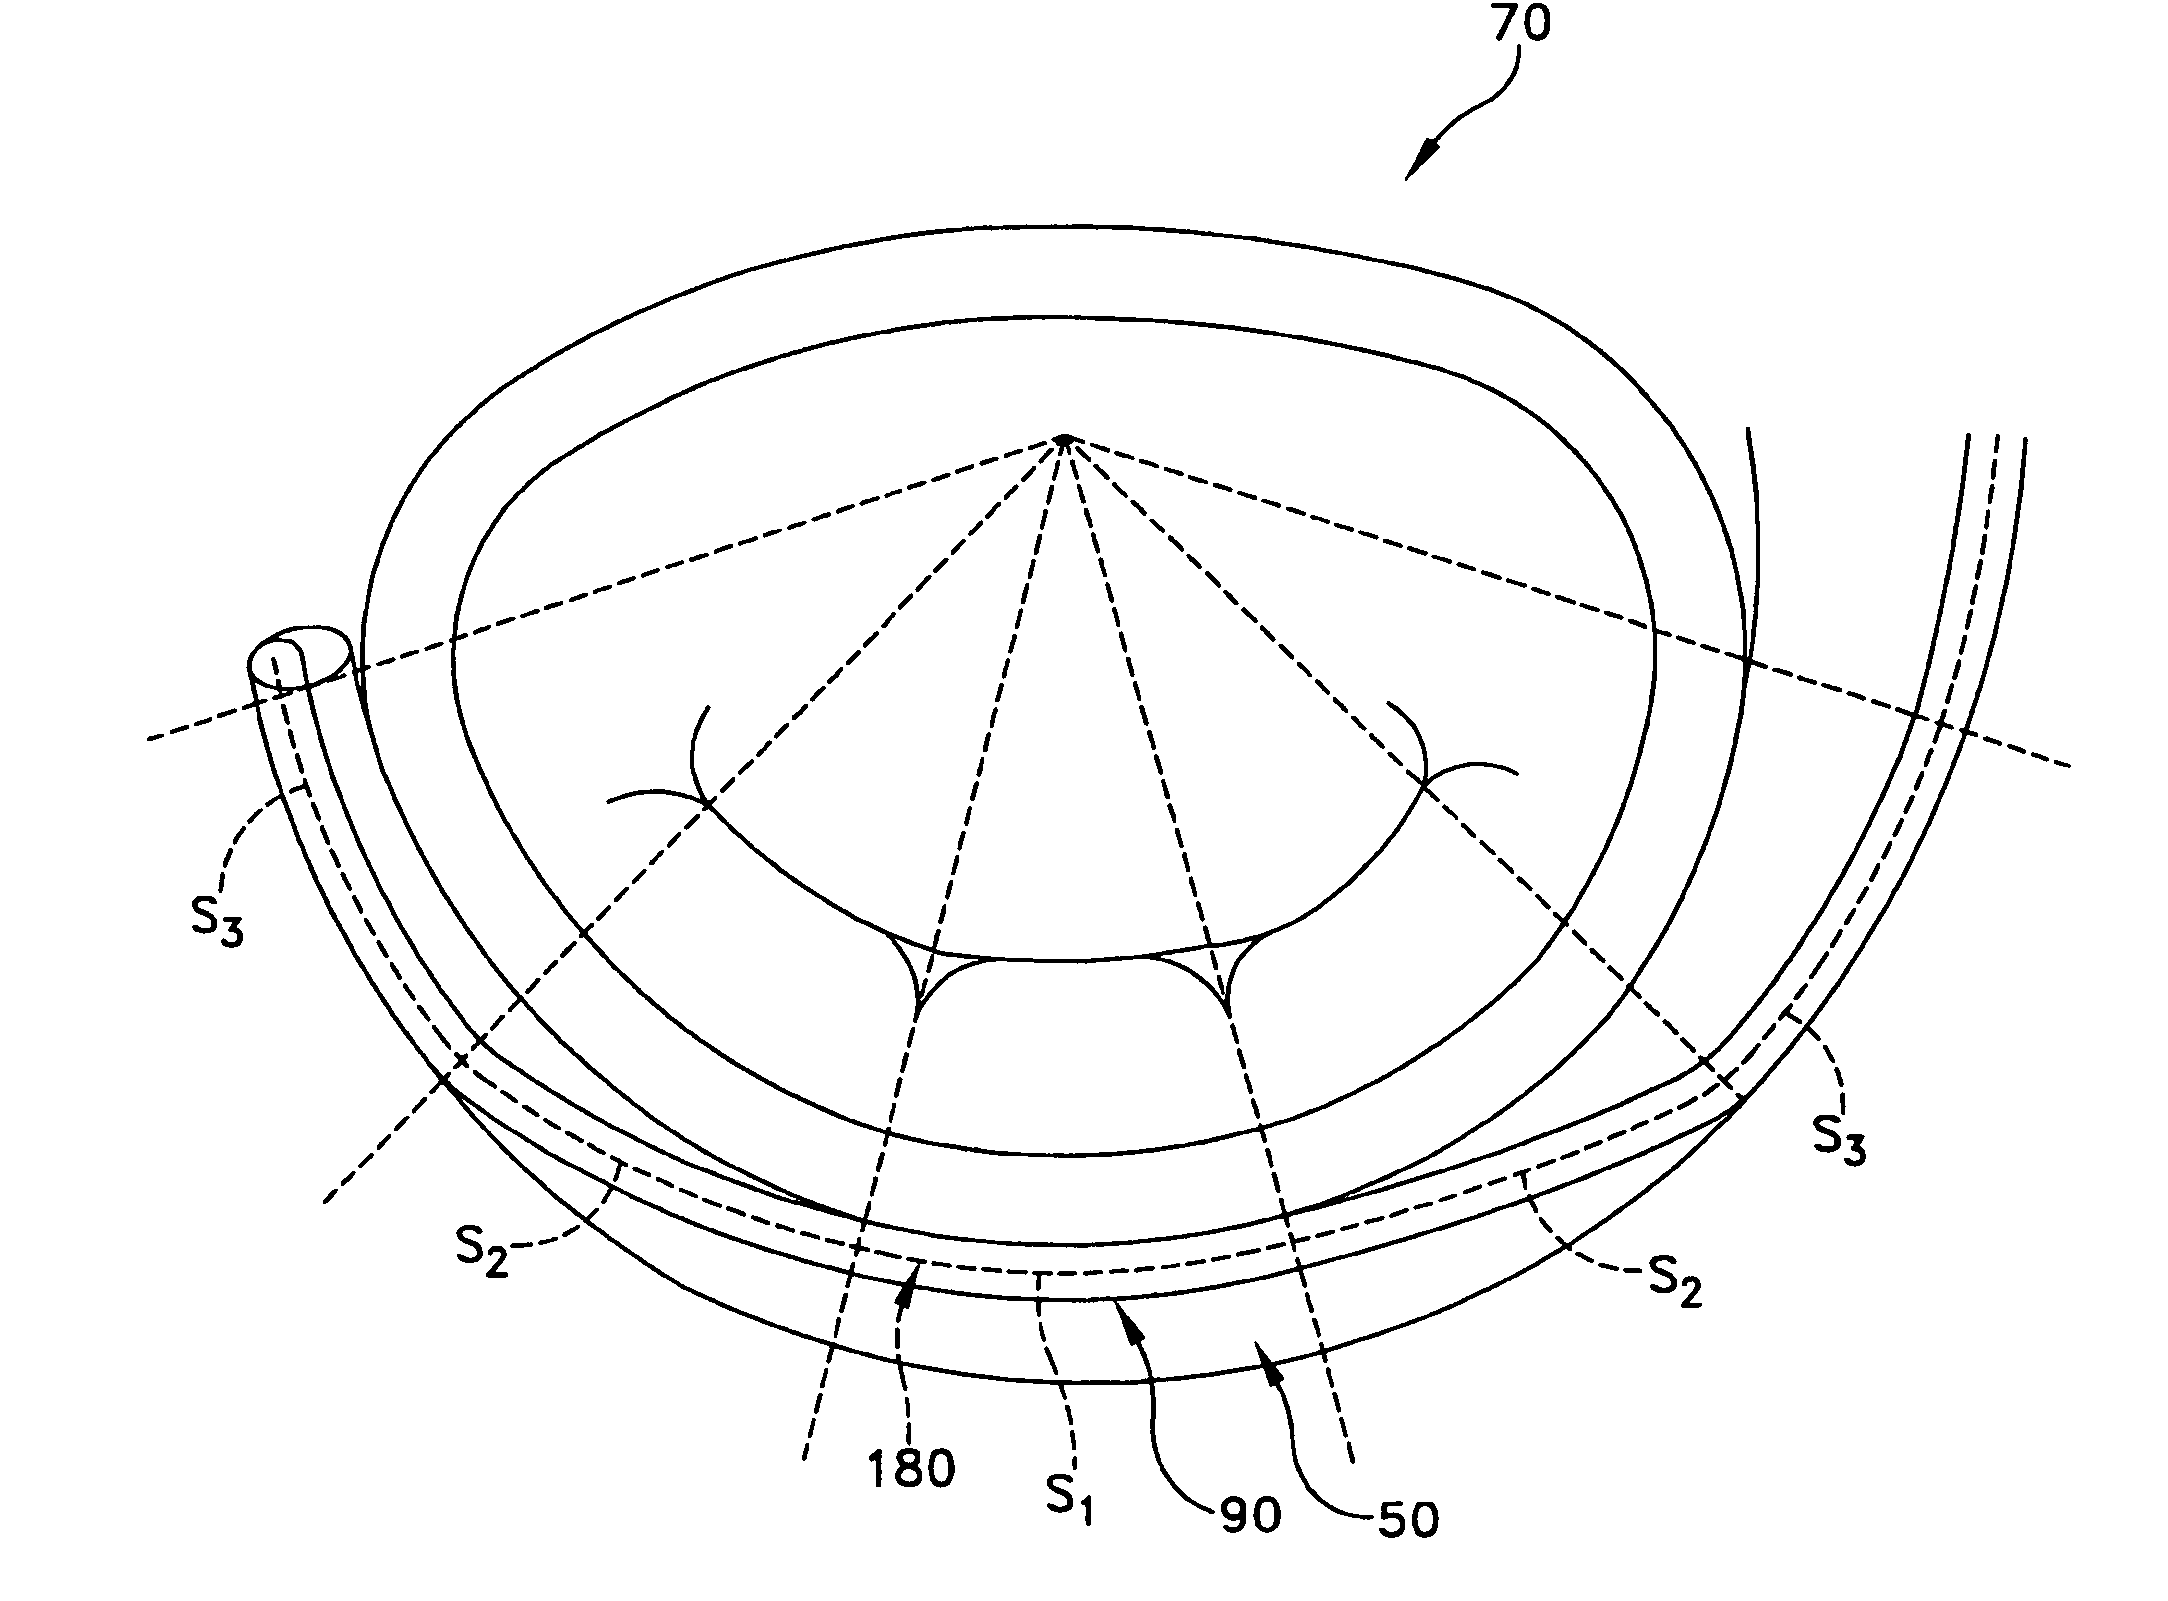 Method and apparatus for improving mitral valve function